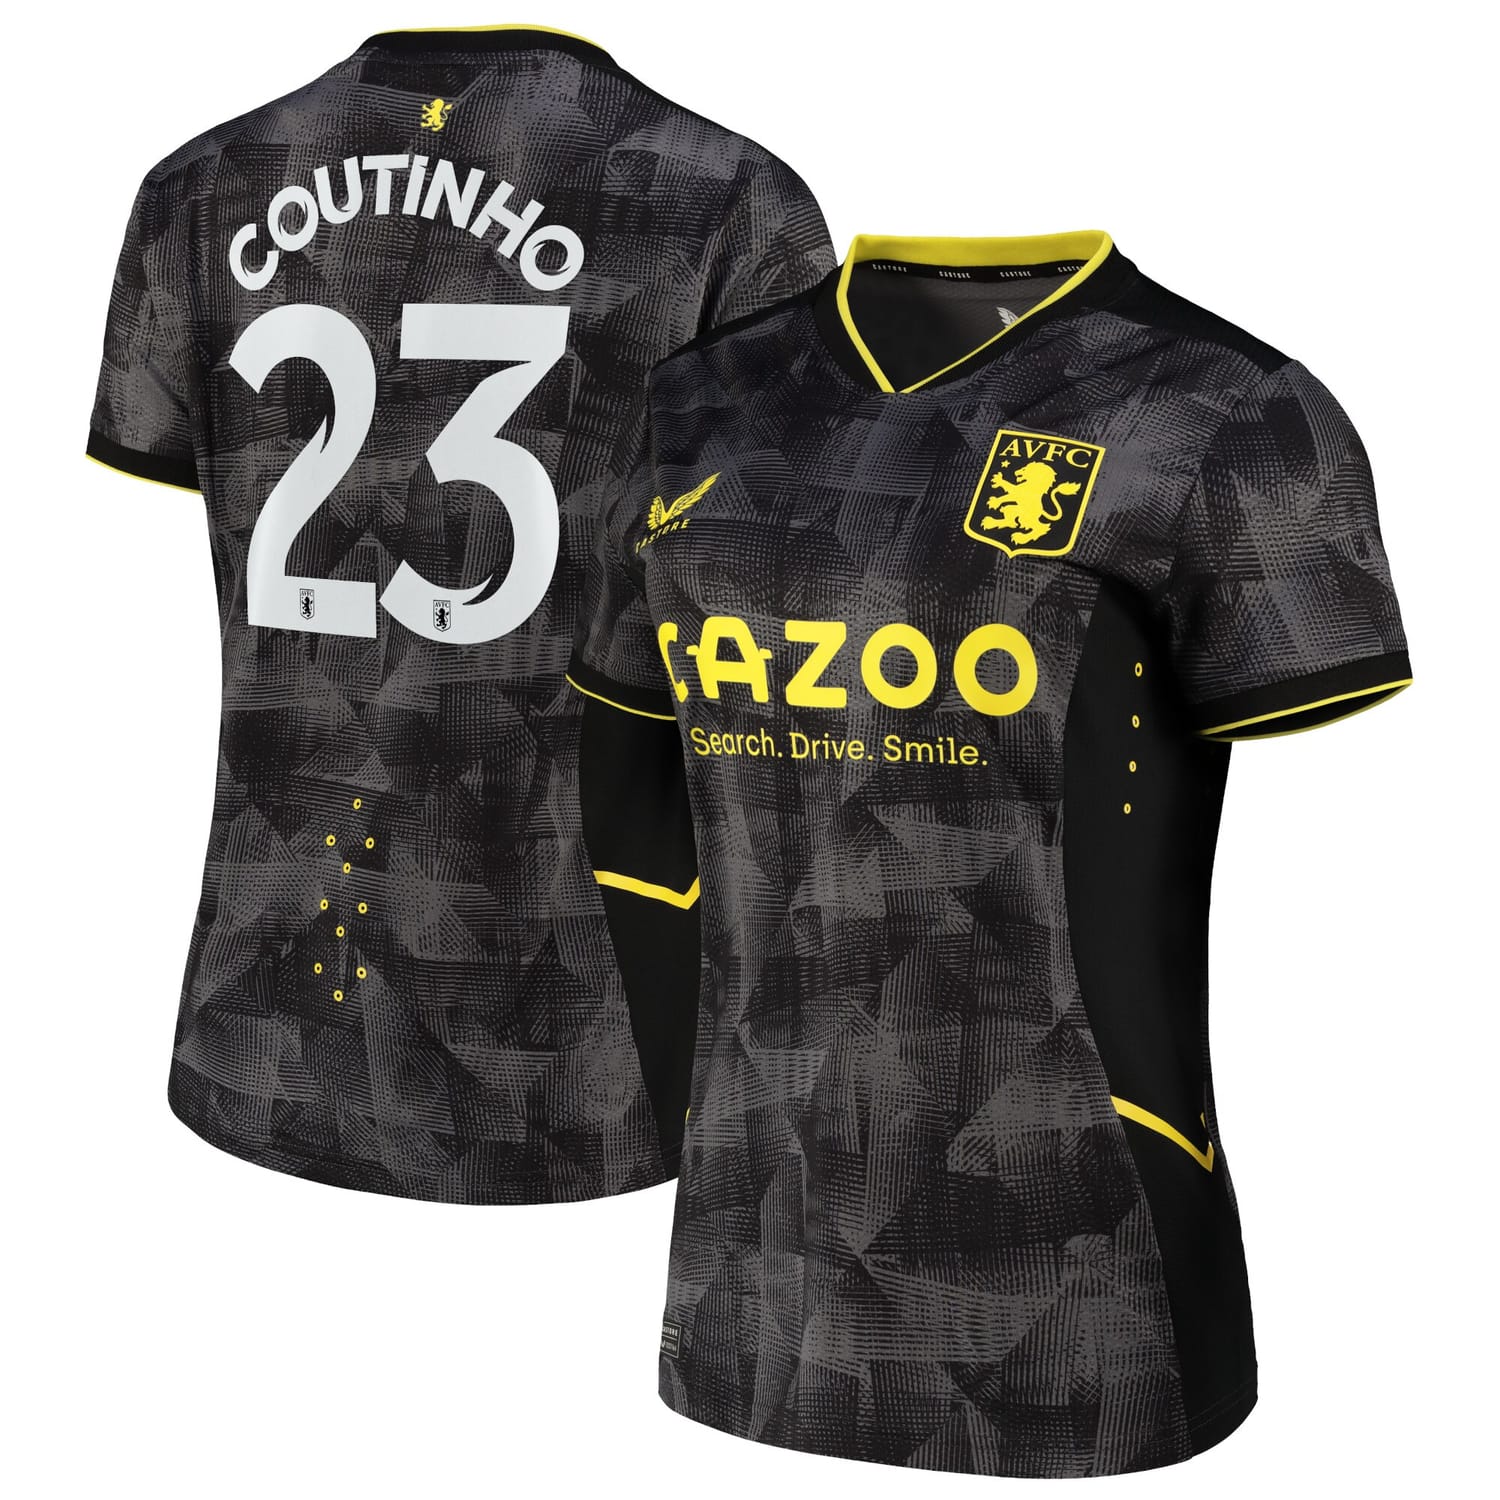 Premier League Aston Villa Third Cup Pro Jersey Shirt 2022-23 player Philippe Coutinho 23 printing for Women